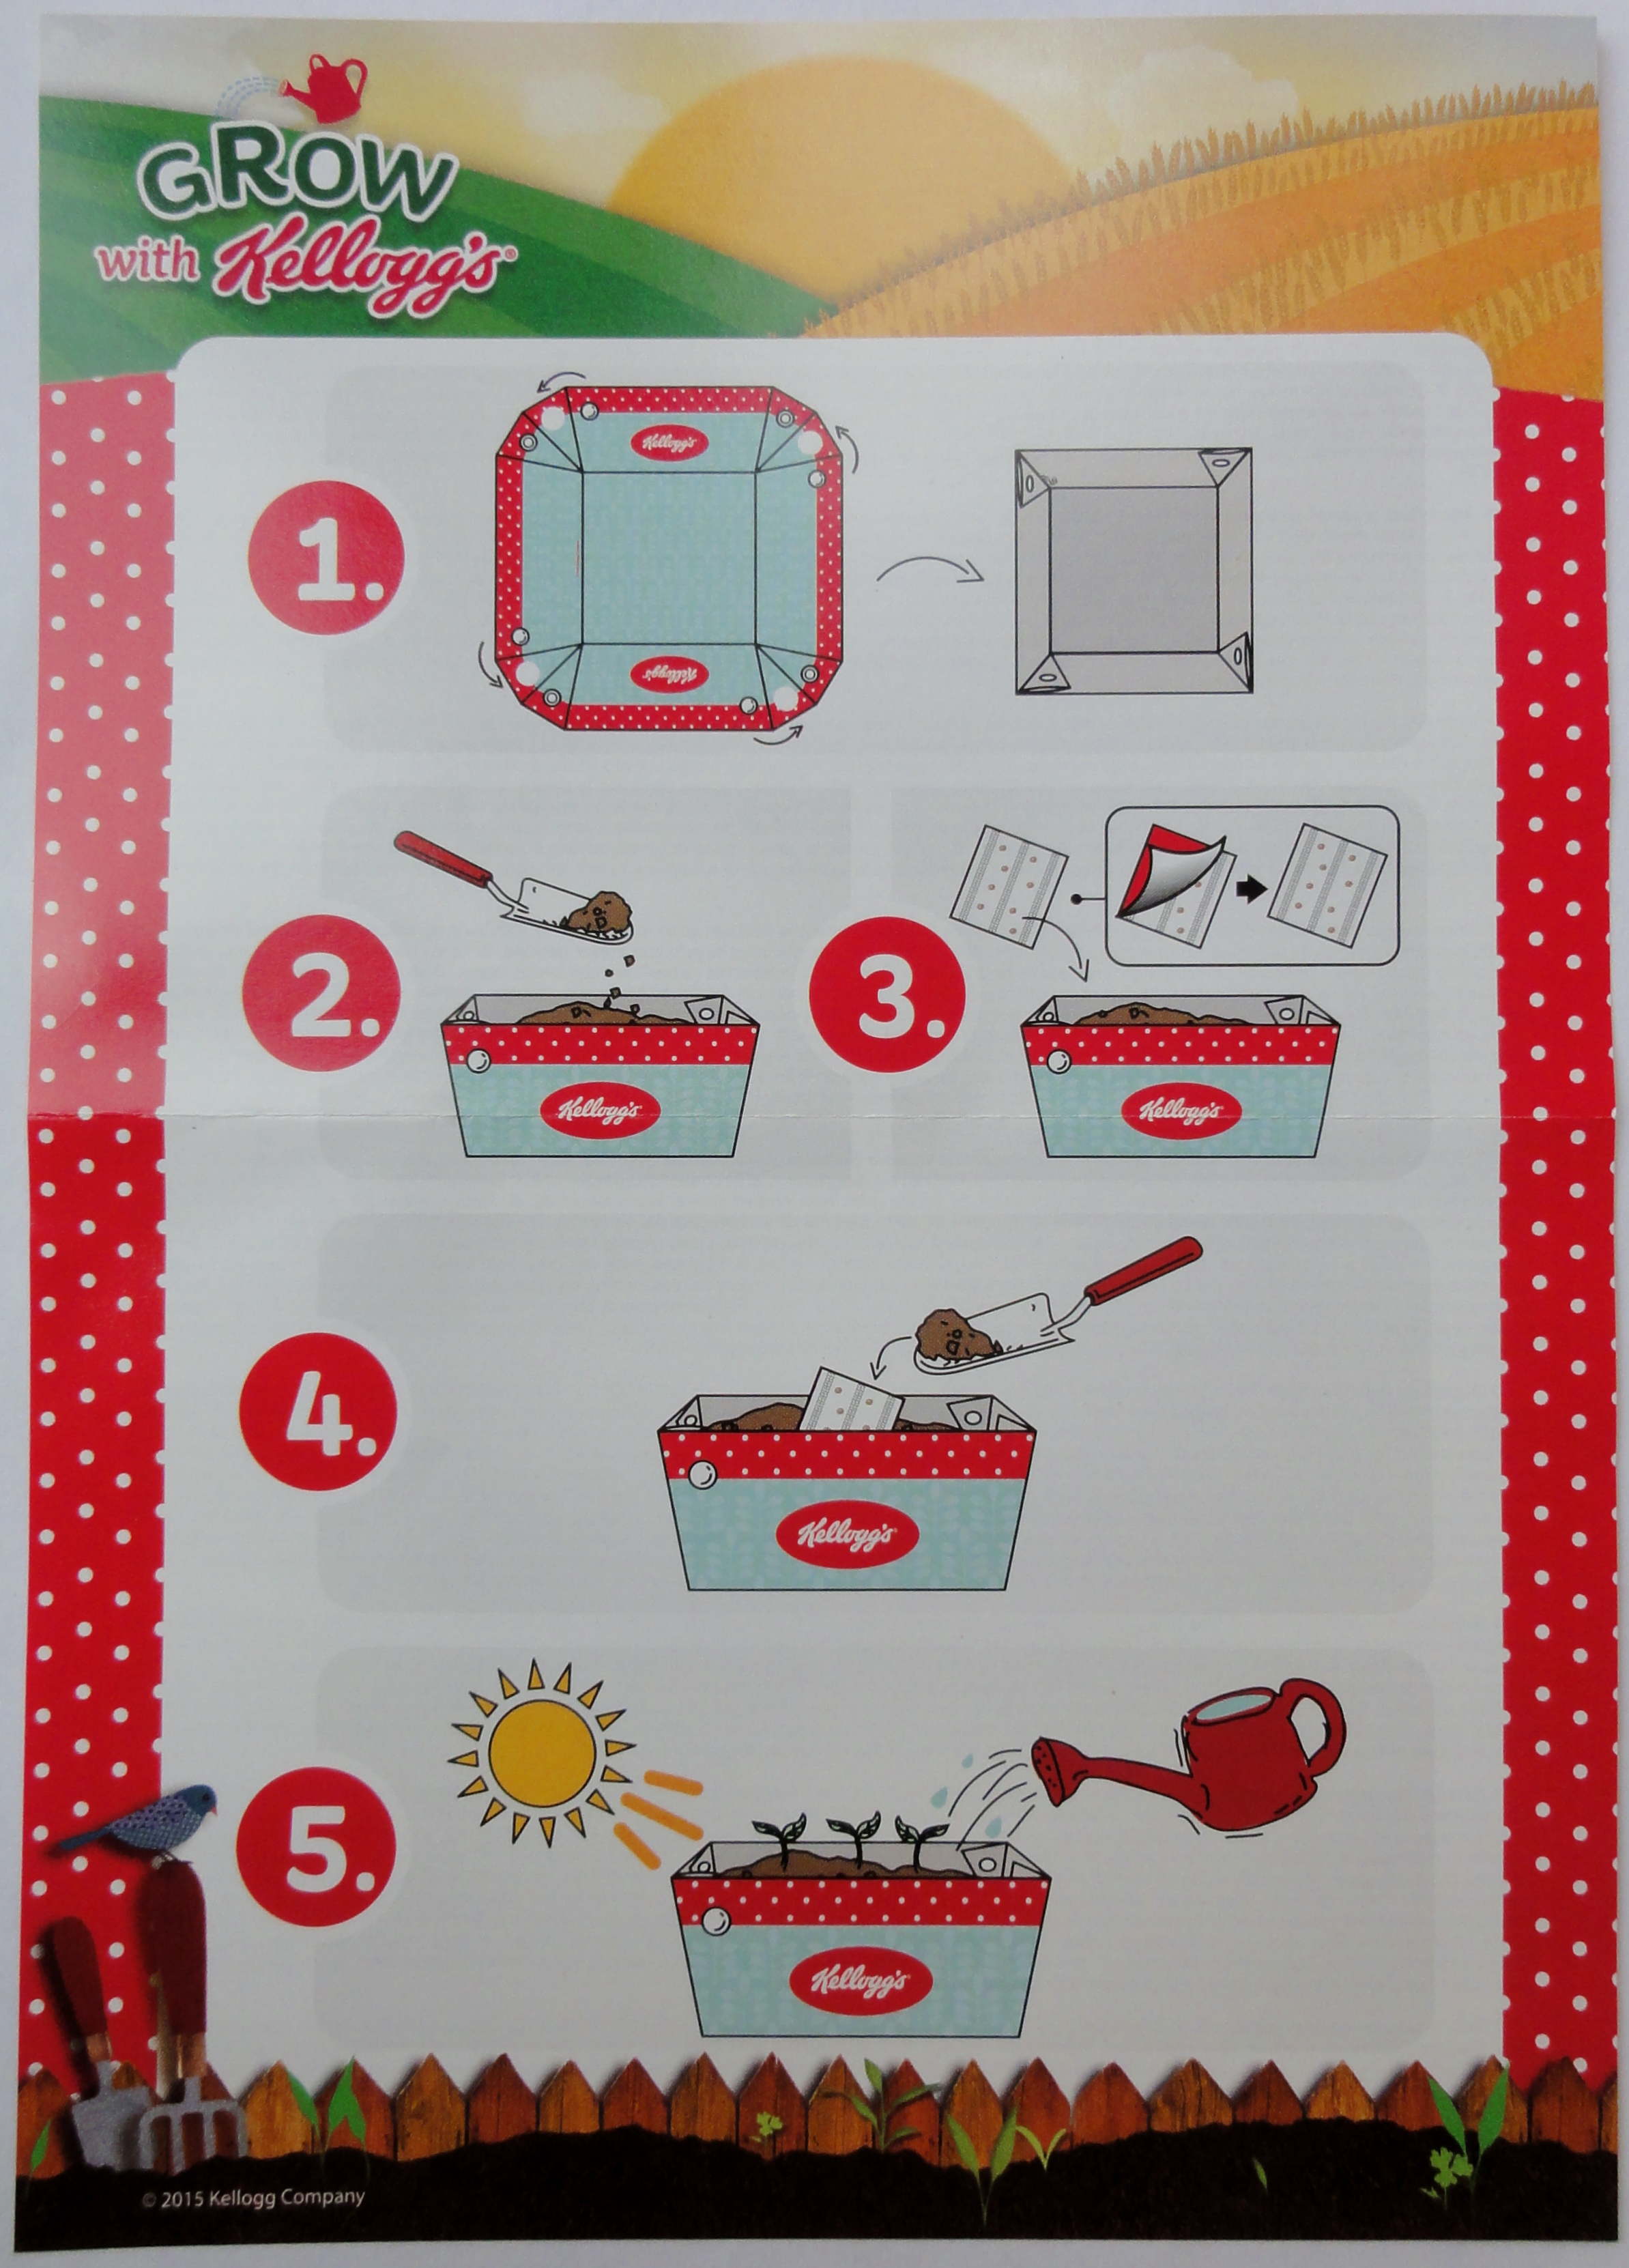 2015 Coco Pops Grow with Kelloggs Kit (5)